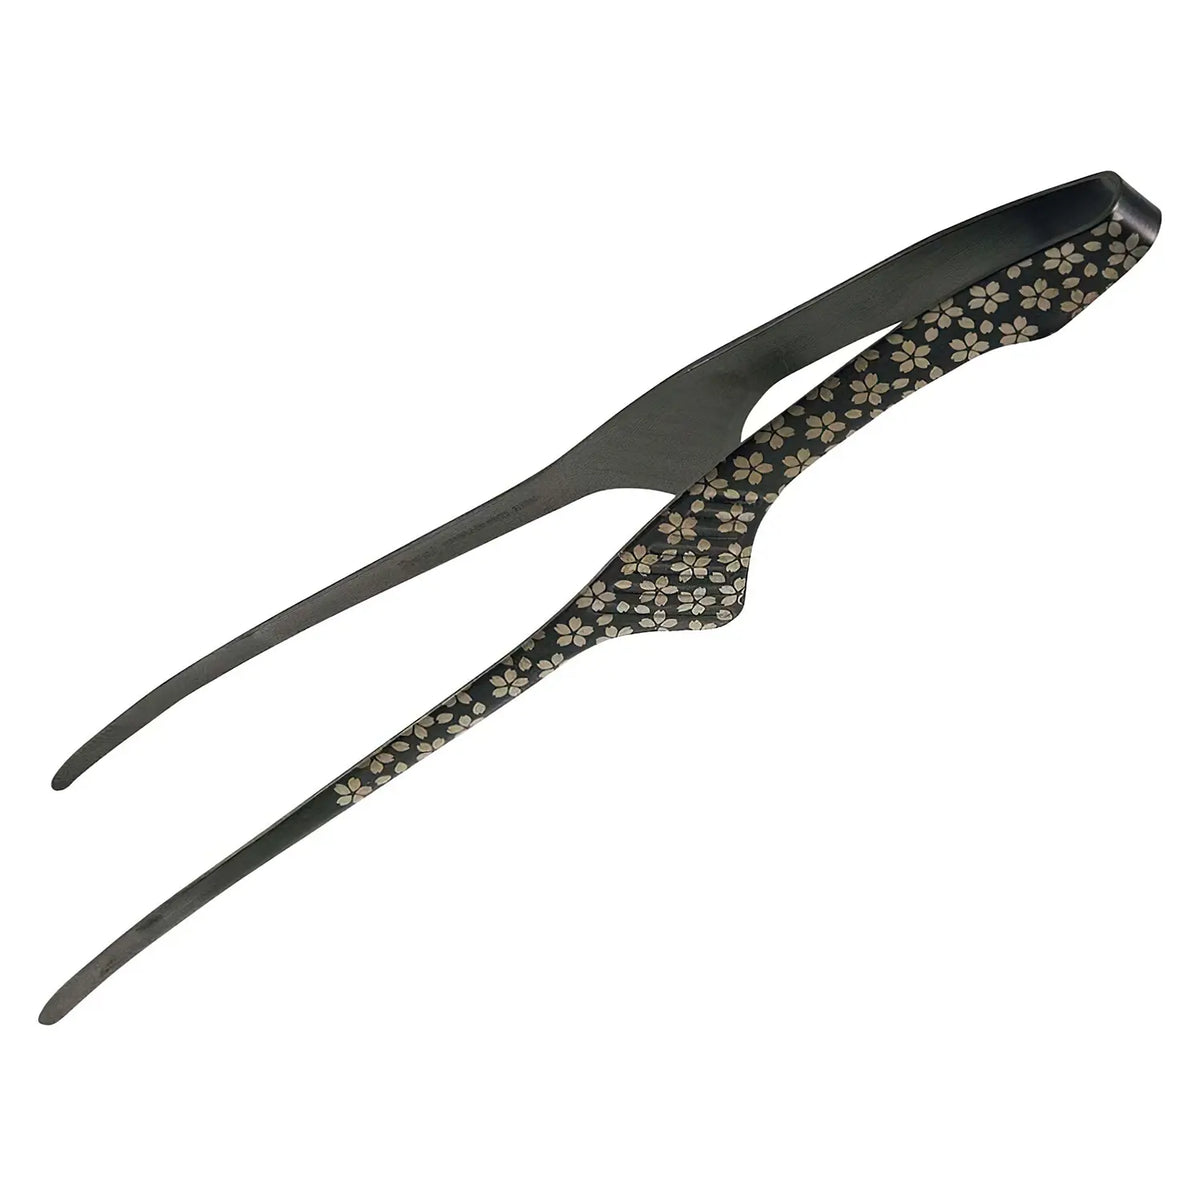 EBM Stainless Steel Clever Chopstick Tongs Black